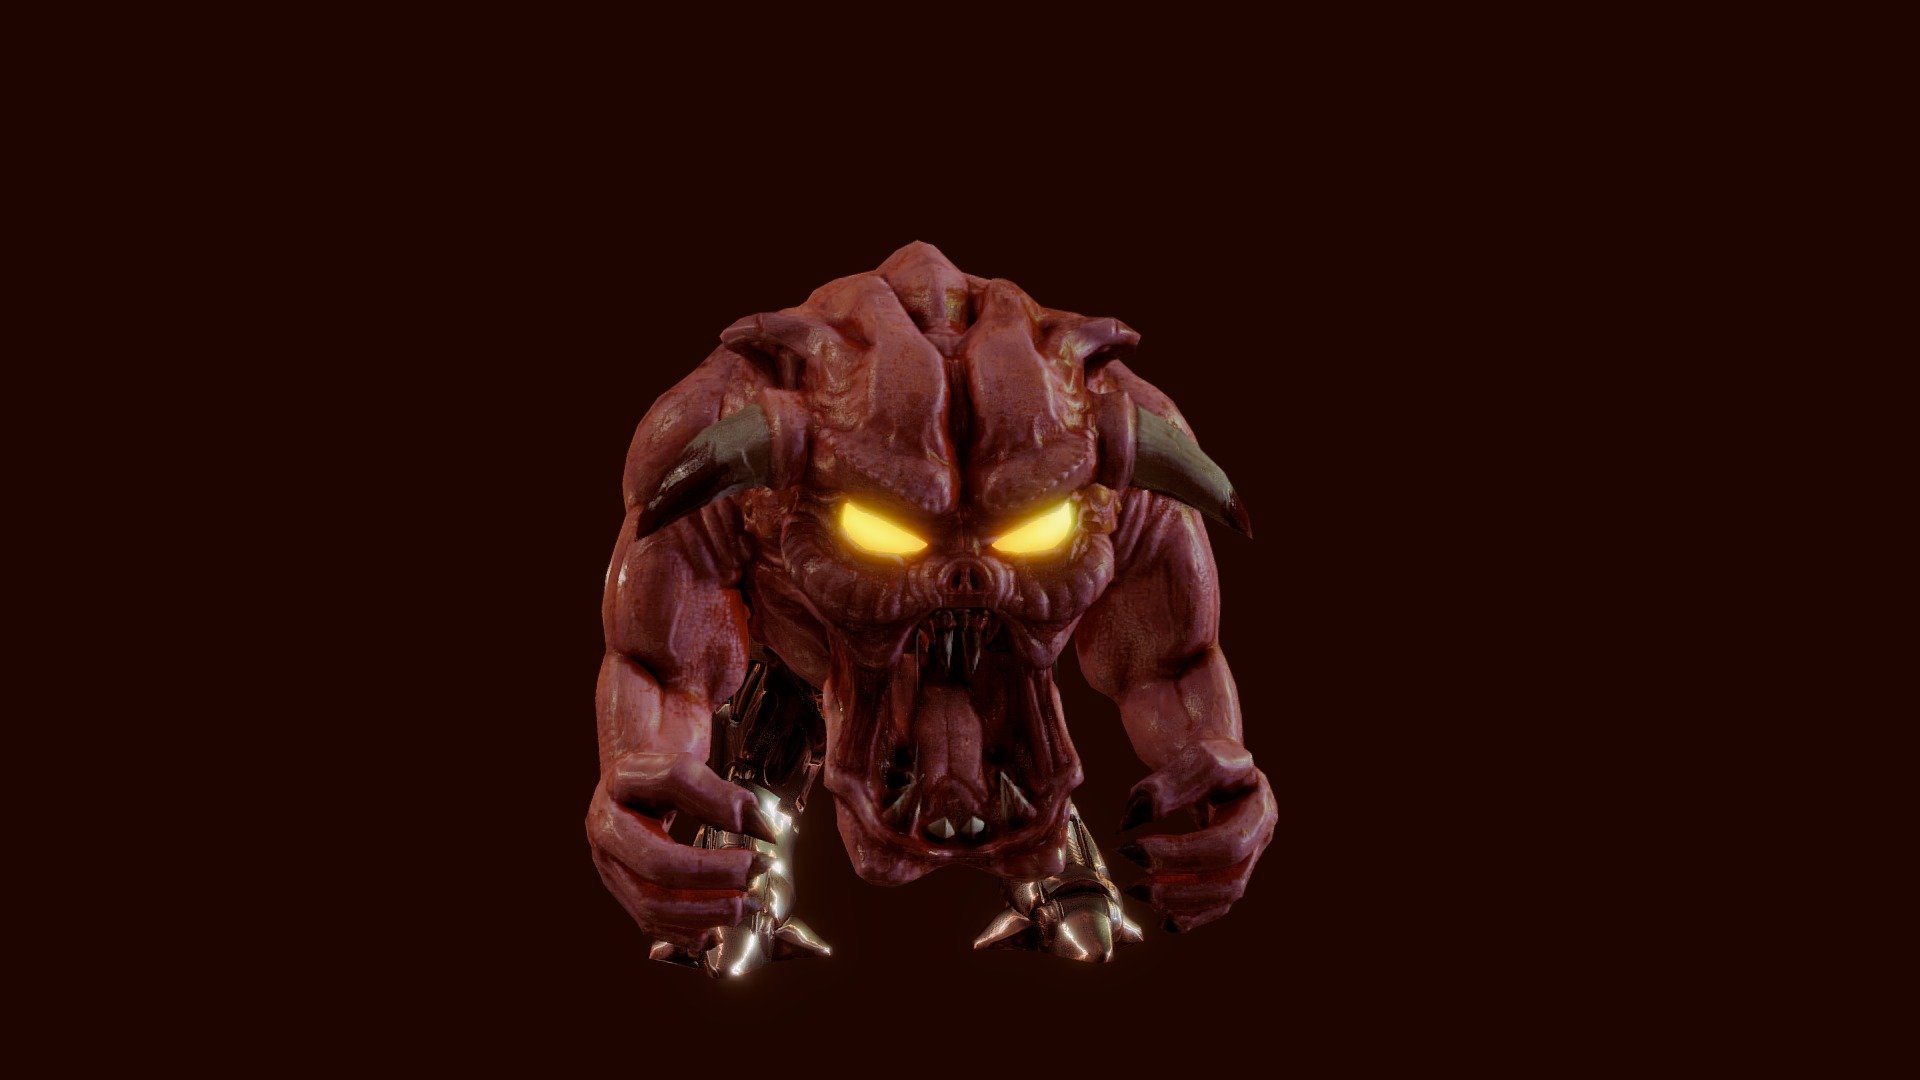 Pinky Demon from DooM.

This fan production is not endorsed by, sponsored by, nor affiliated with Bethesda Softworks, id Software, or any other DooM franchise, and is a non-commercial fan-made 3D model intended for recreational use. No commercial exhibition or distribution is permitted 3d model